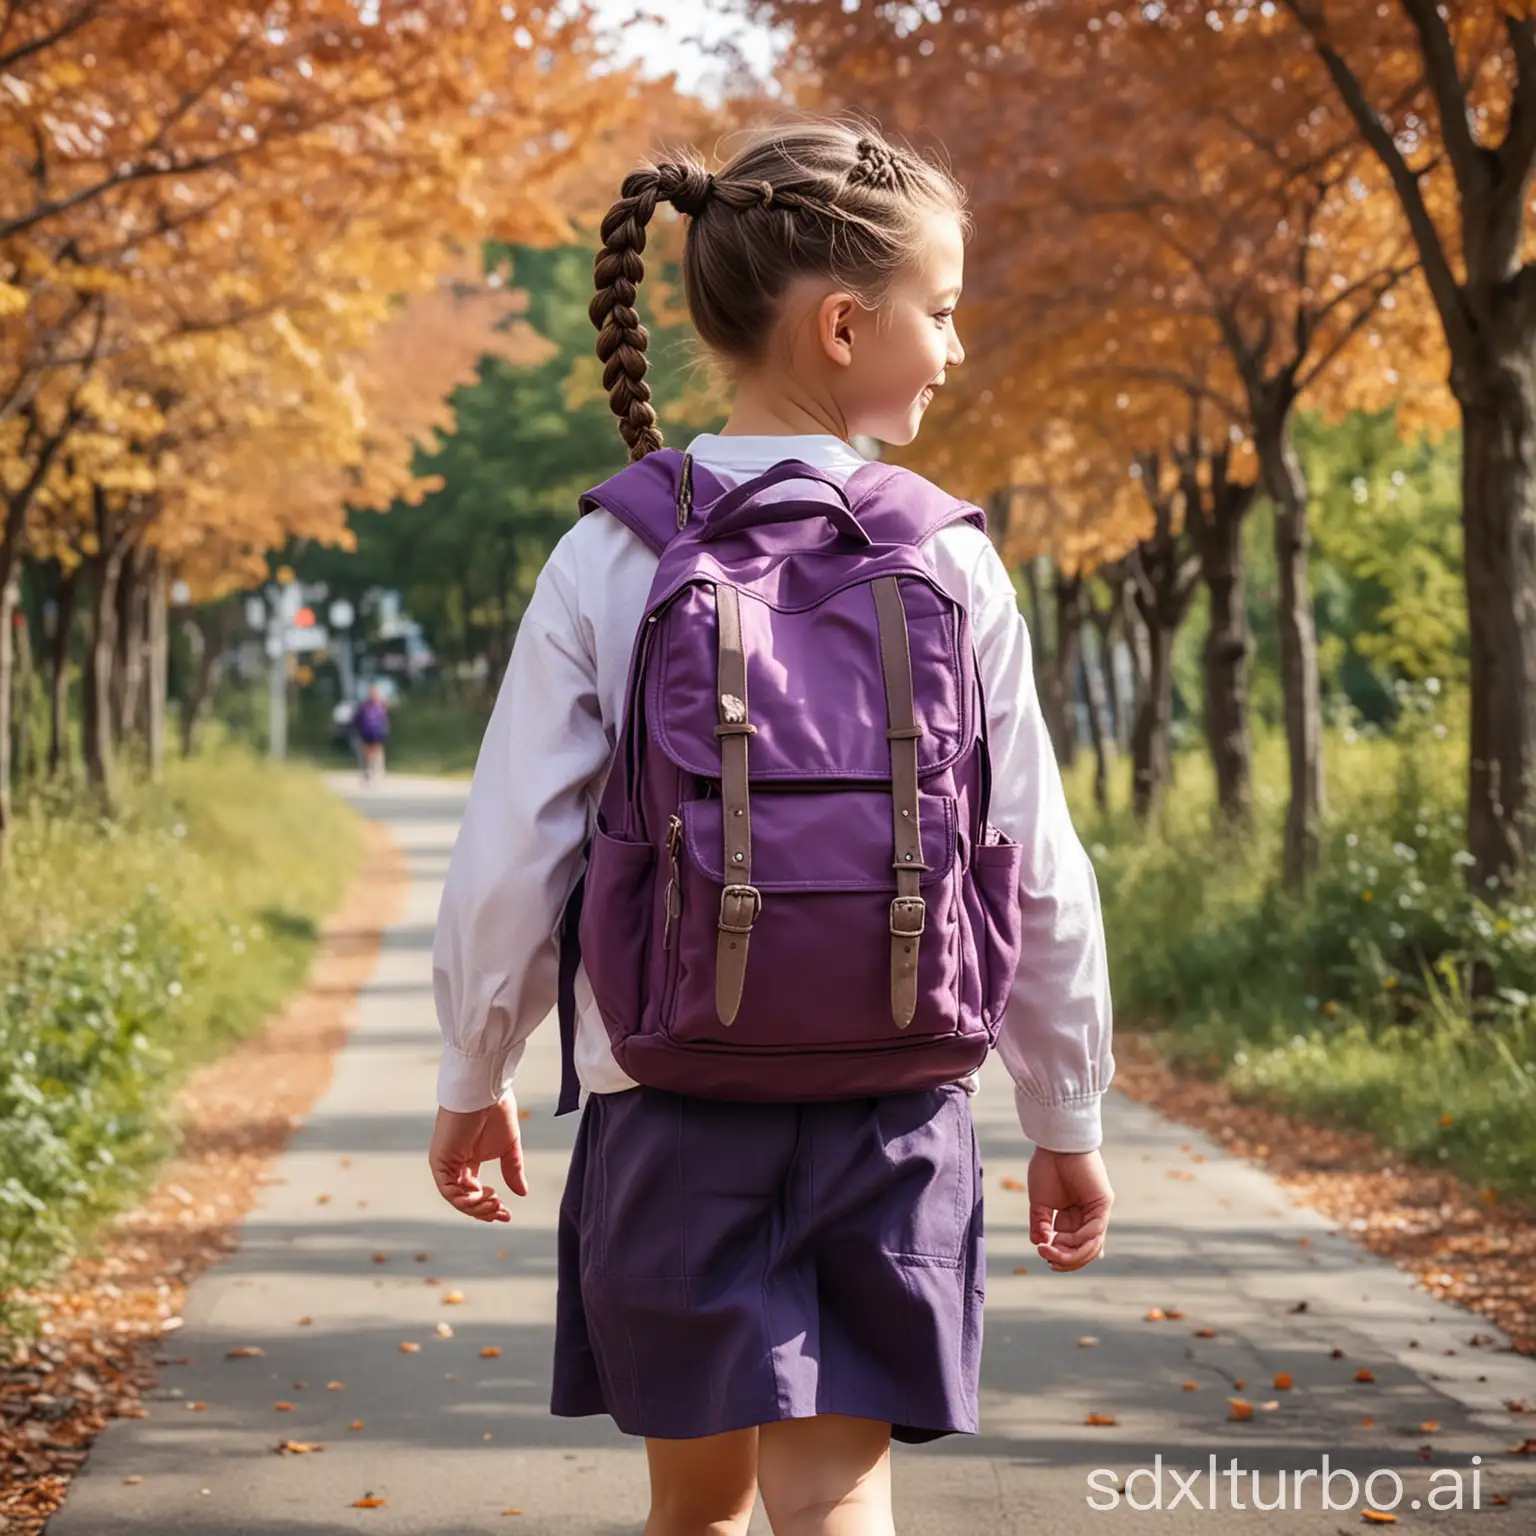 a little elementary school girl, with high high braided pigtails, carrying a purple backpack, walking on a road with maple trees, a light wind blowing the maple leaves like butterflies fluttering down, the girl smiling happily